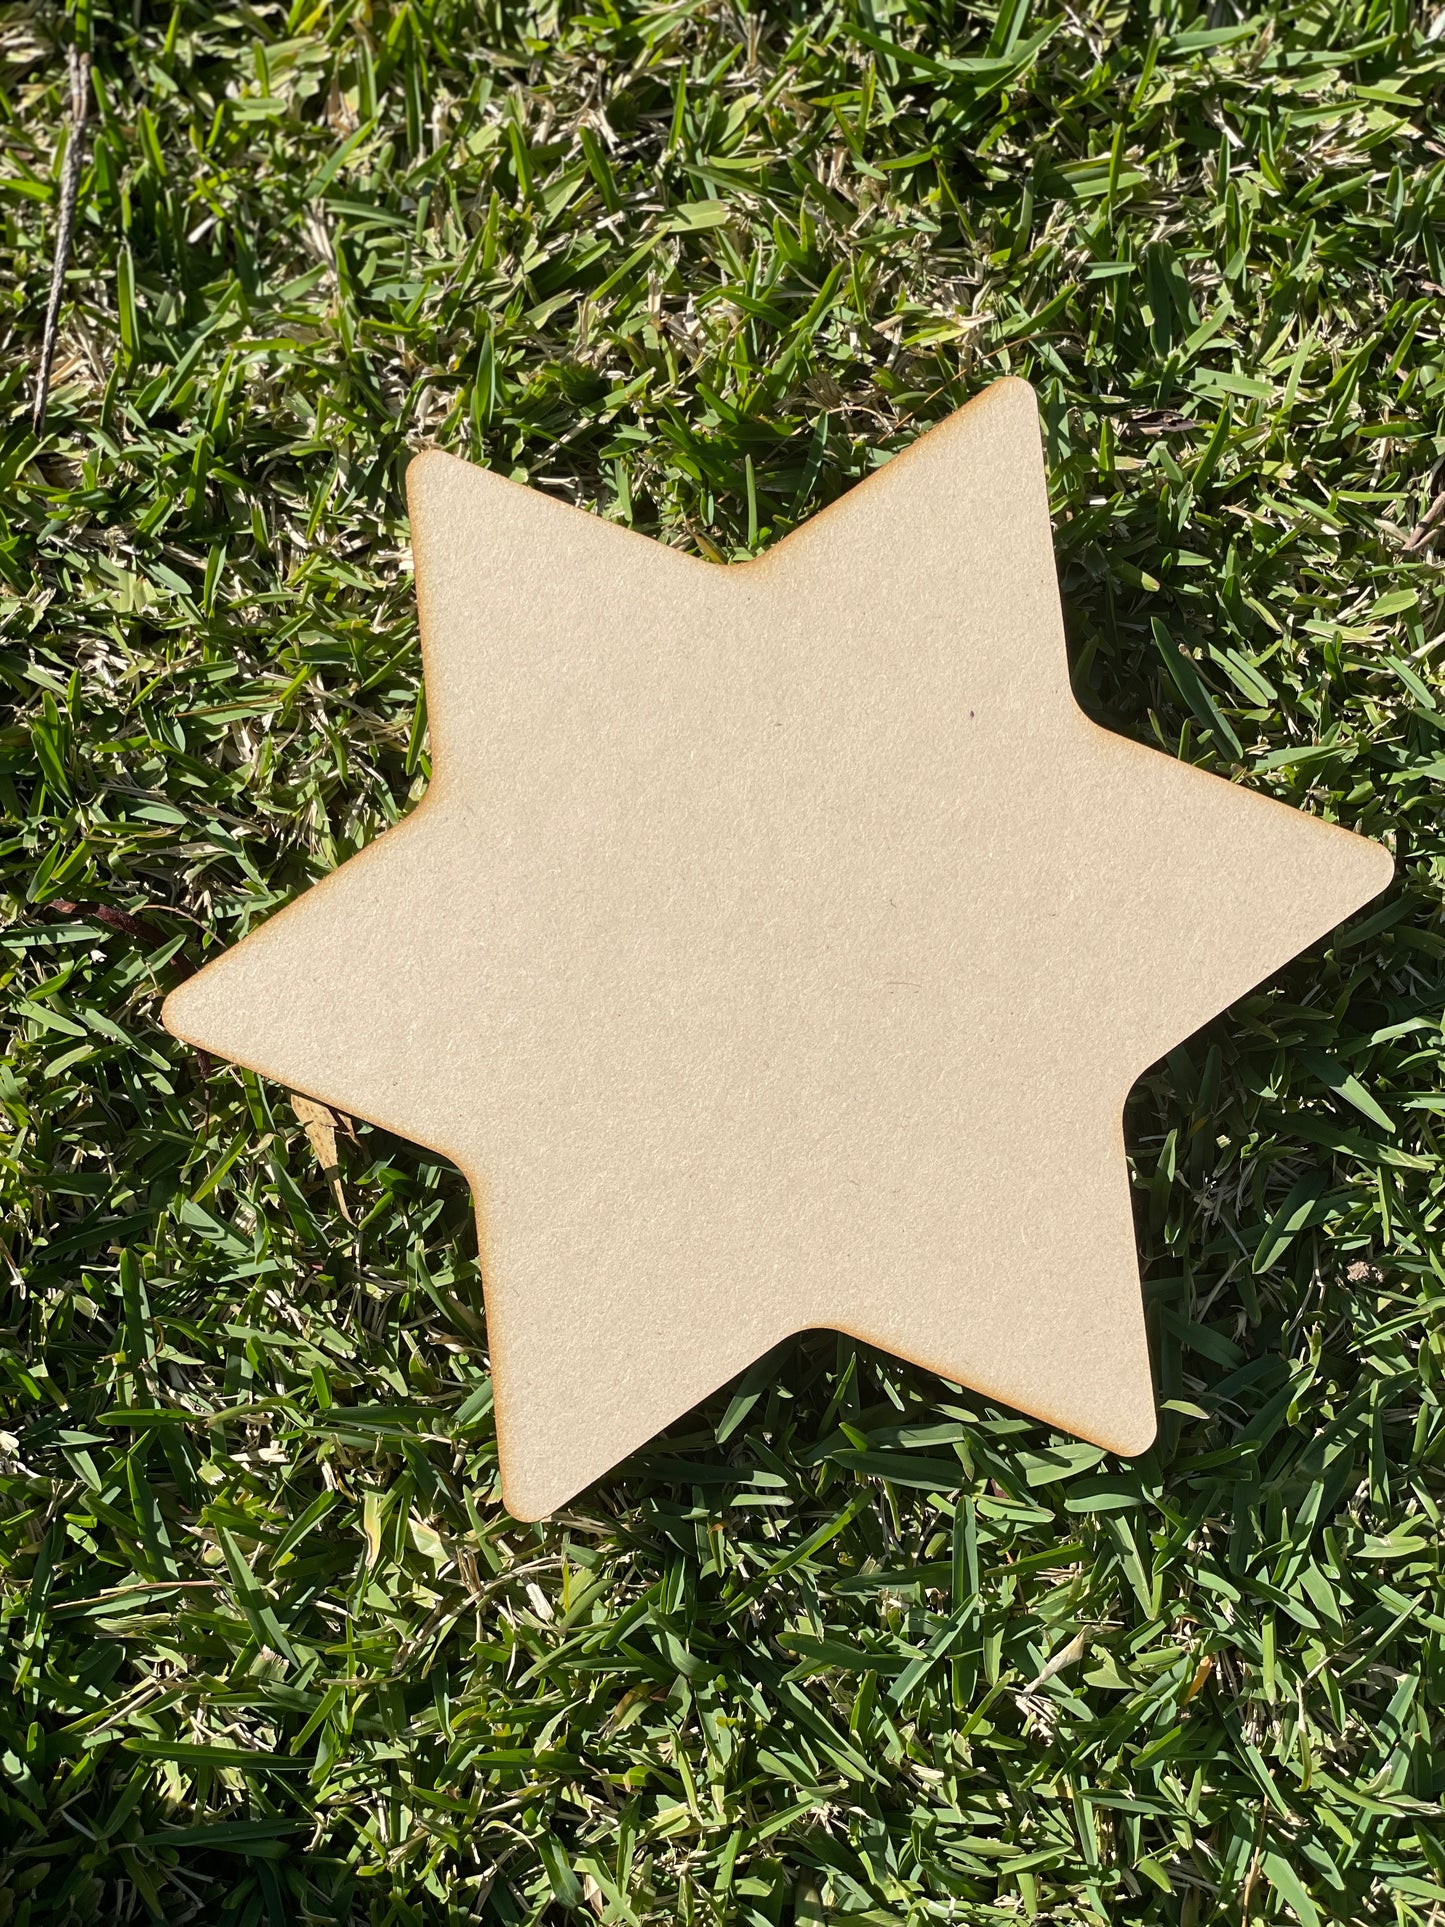 6 Point Star Shape MDF Art Board, Resin Board, Art Blank, Craft Blank ~3mm/6mm/9mm thickness available~